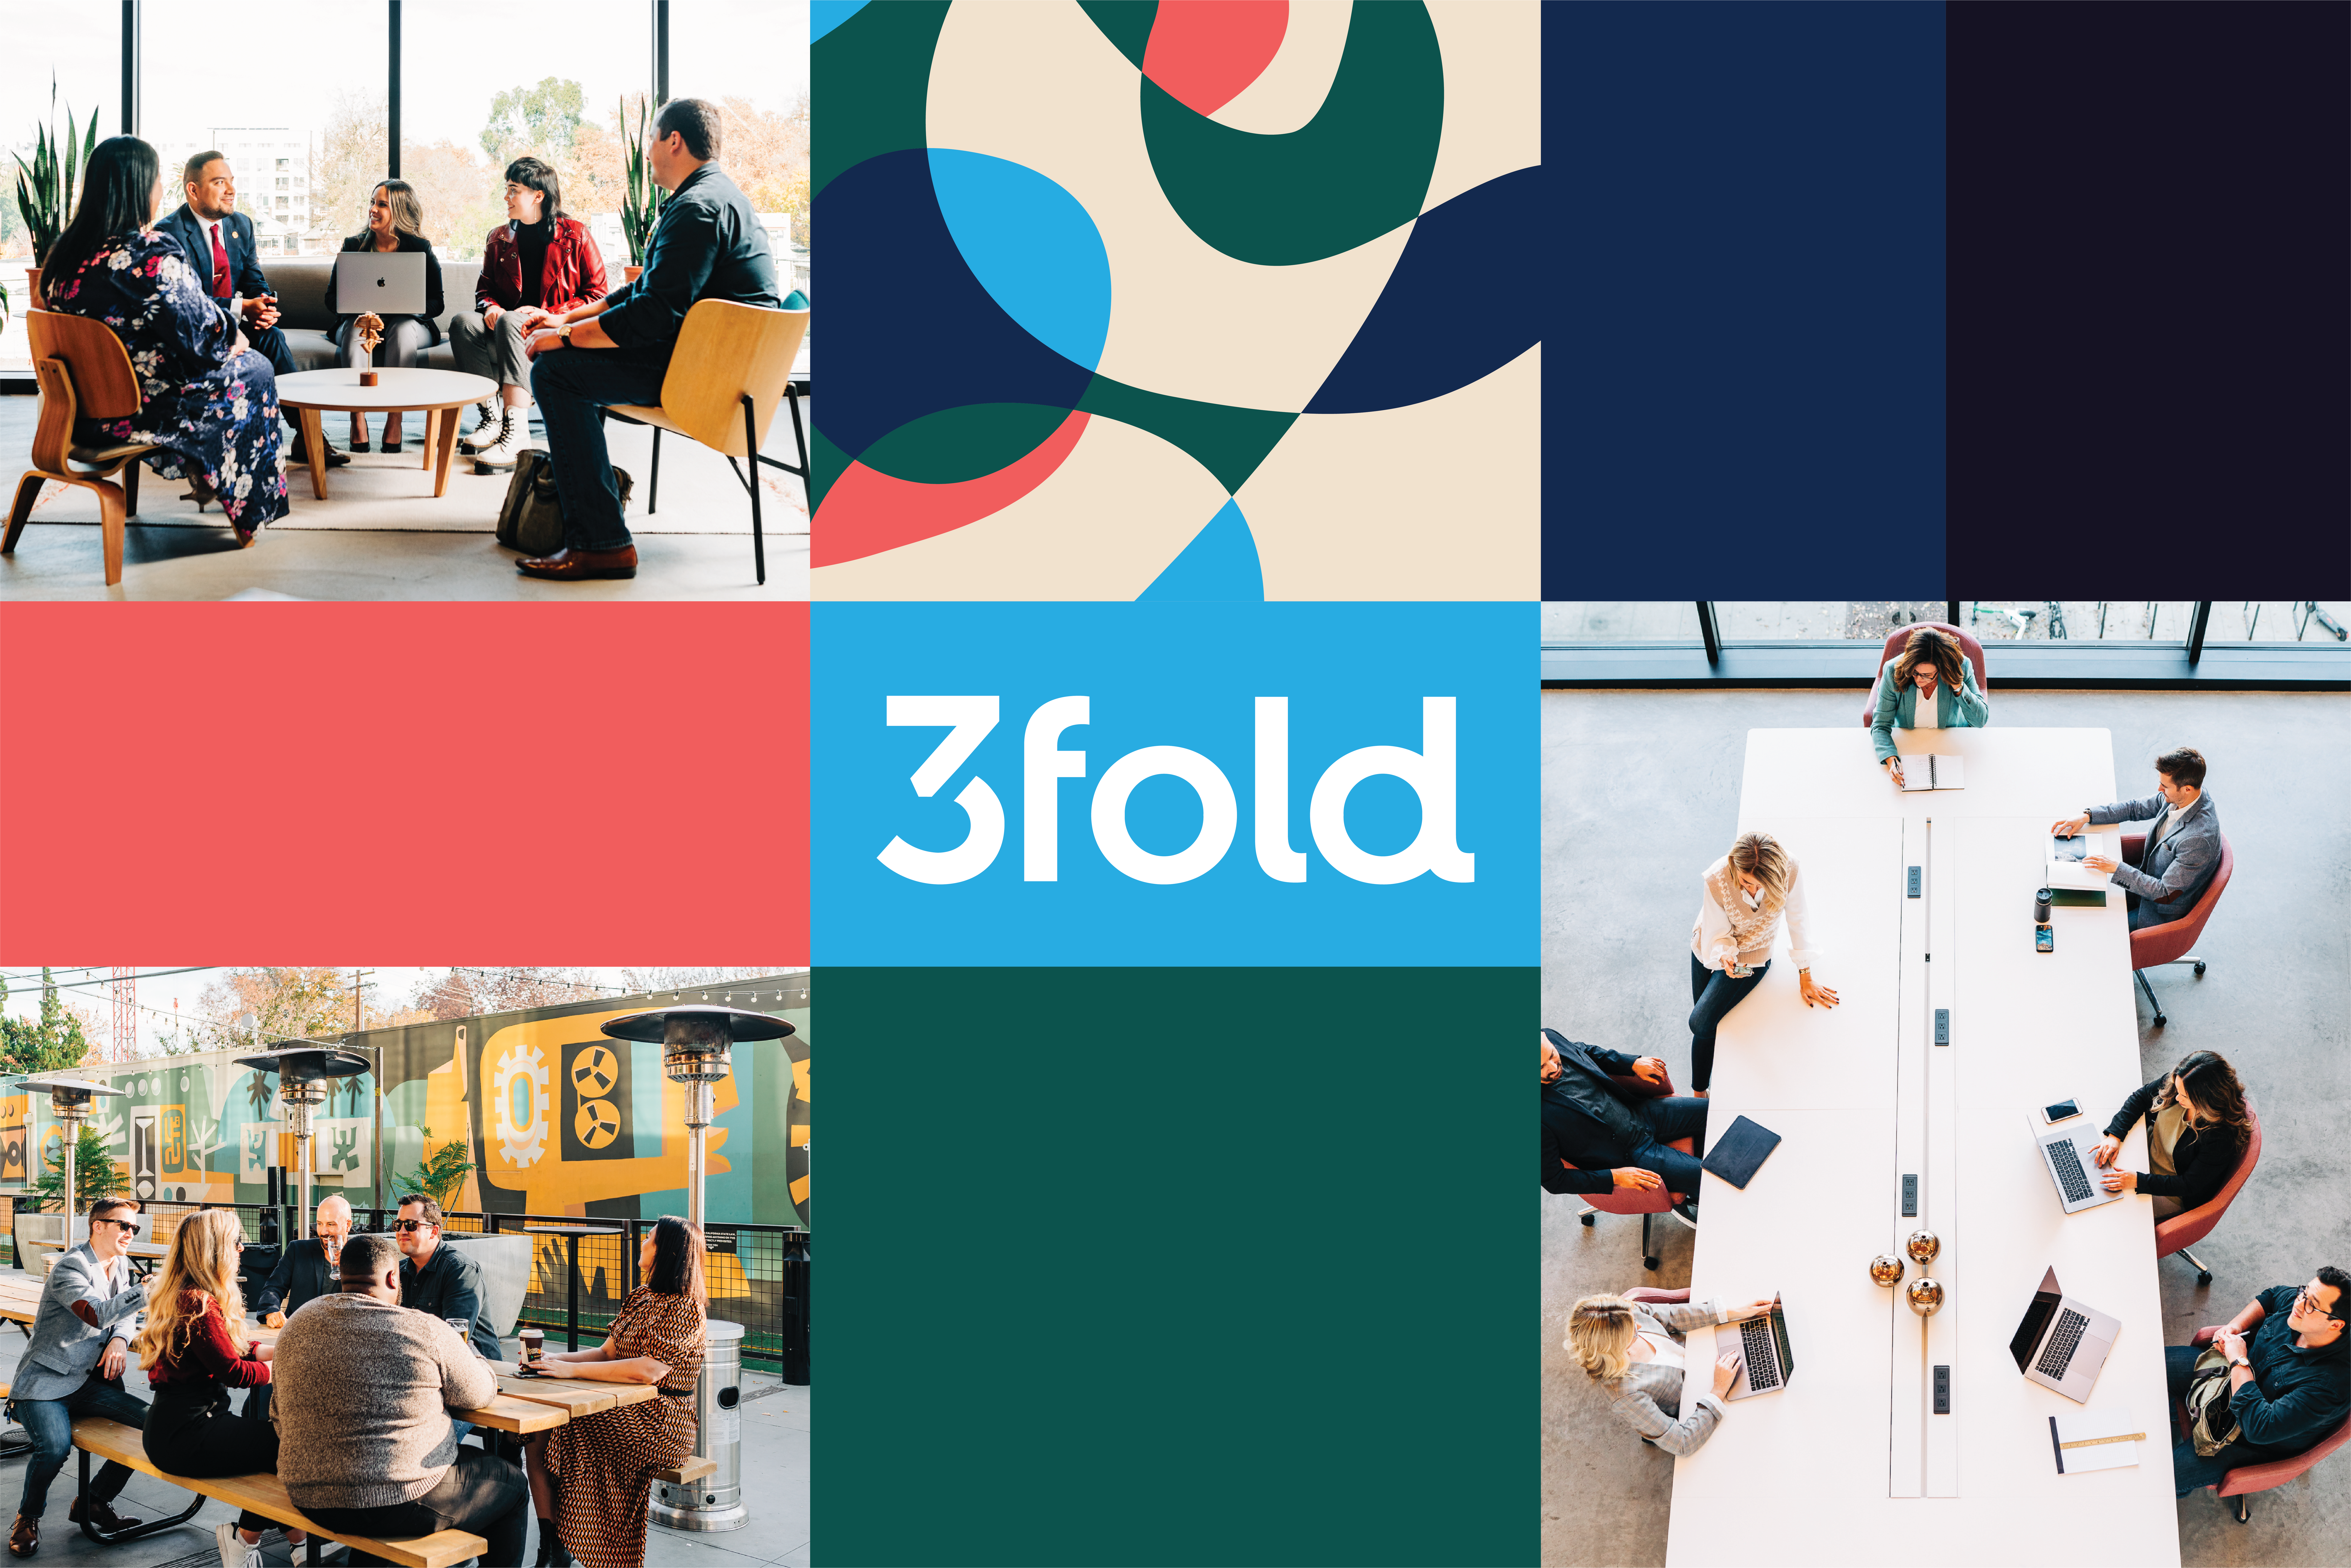 Collage around blue logo, including staff images and brand colors